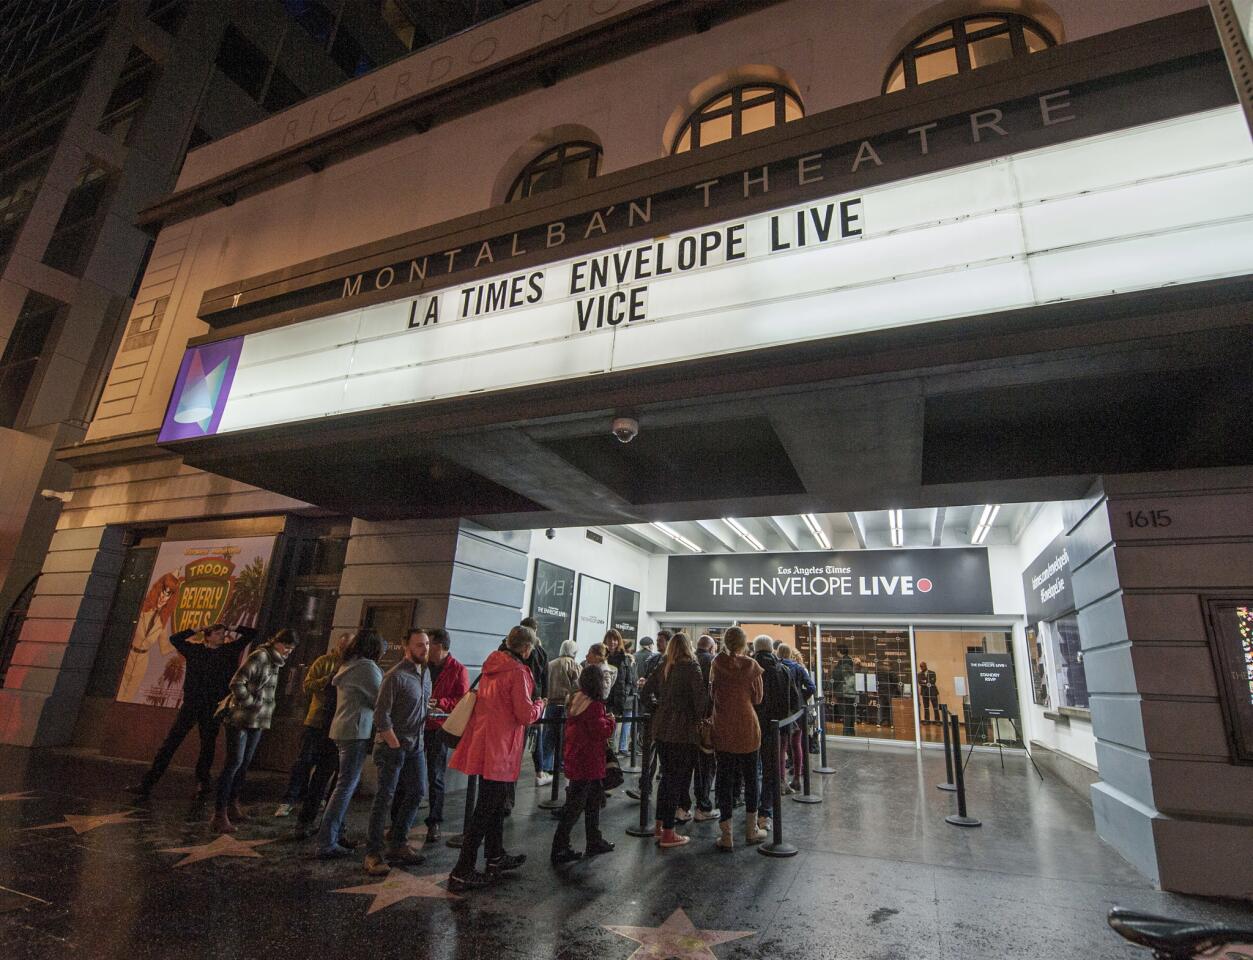 "Vice" was the subject of an L.A. Times Envelope Live screening and Q&A at the Montalbán in Hollywood.